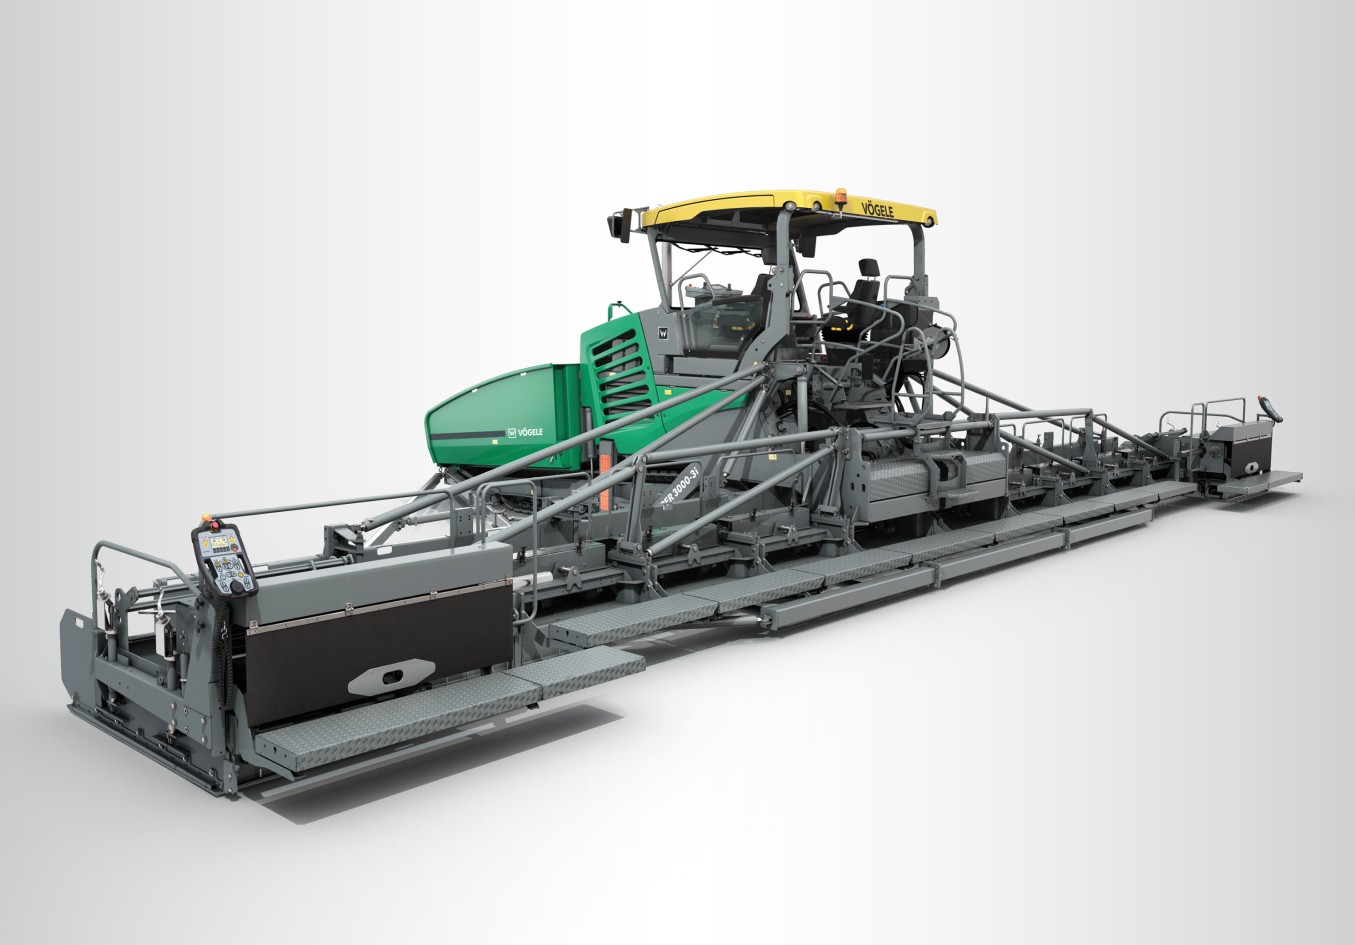 Vögele’s large SUPER 3000-3i paver with the SB 350 Fixed-Width Screed.